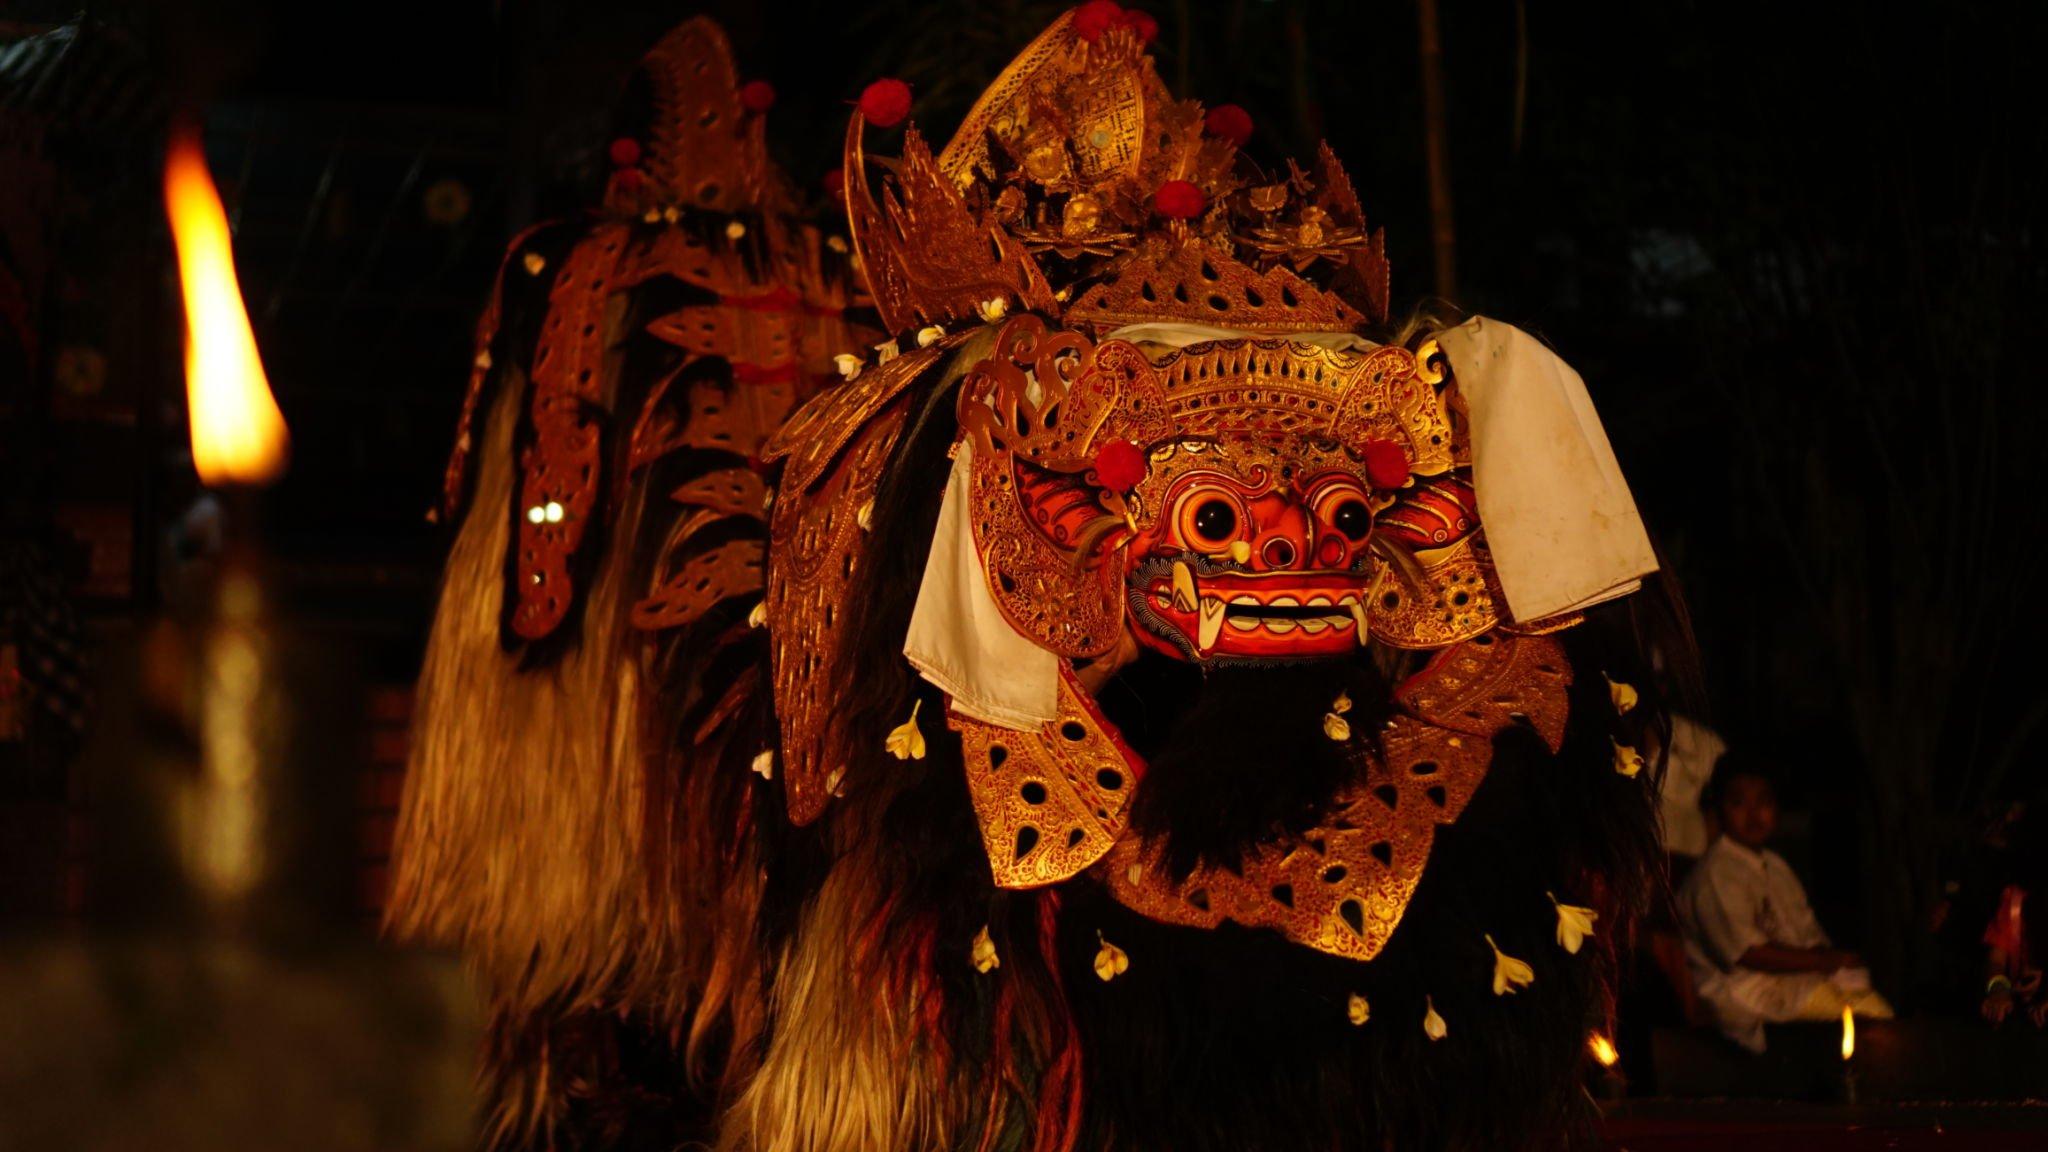 Barong as the symbol of goodness